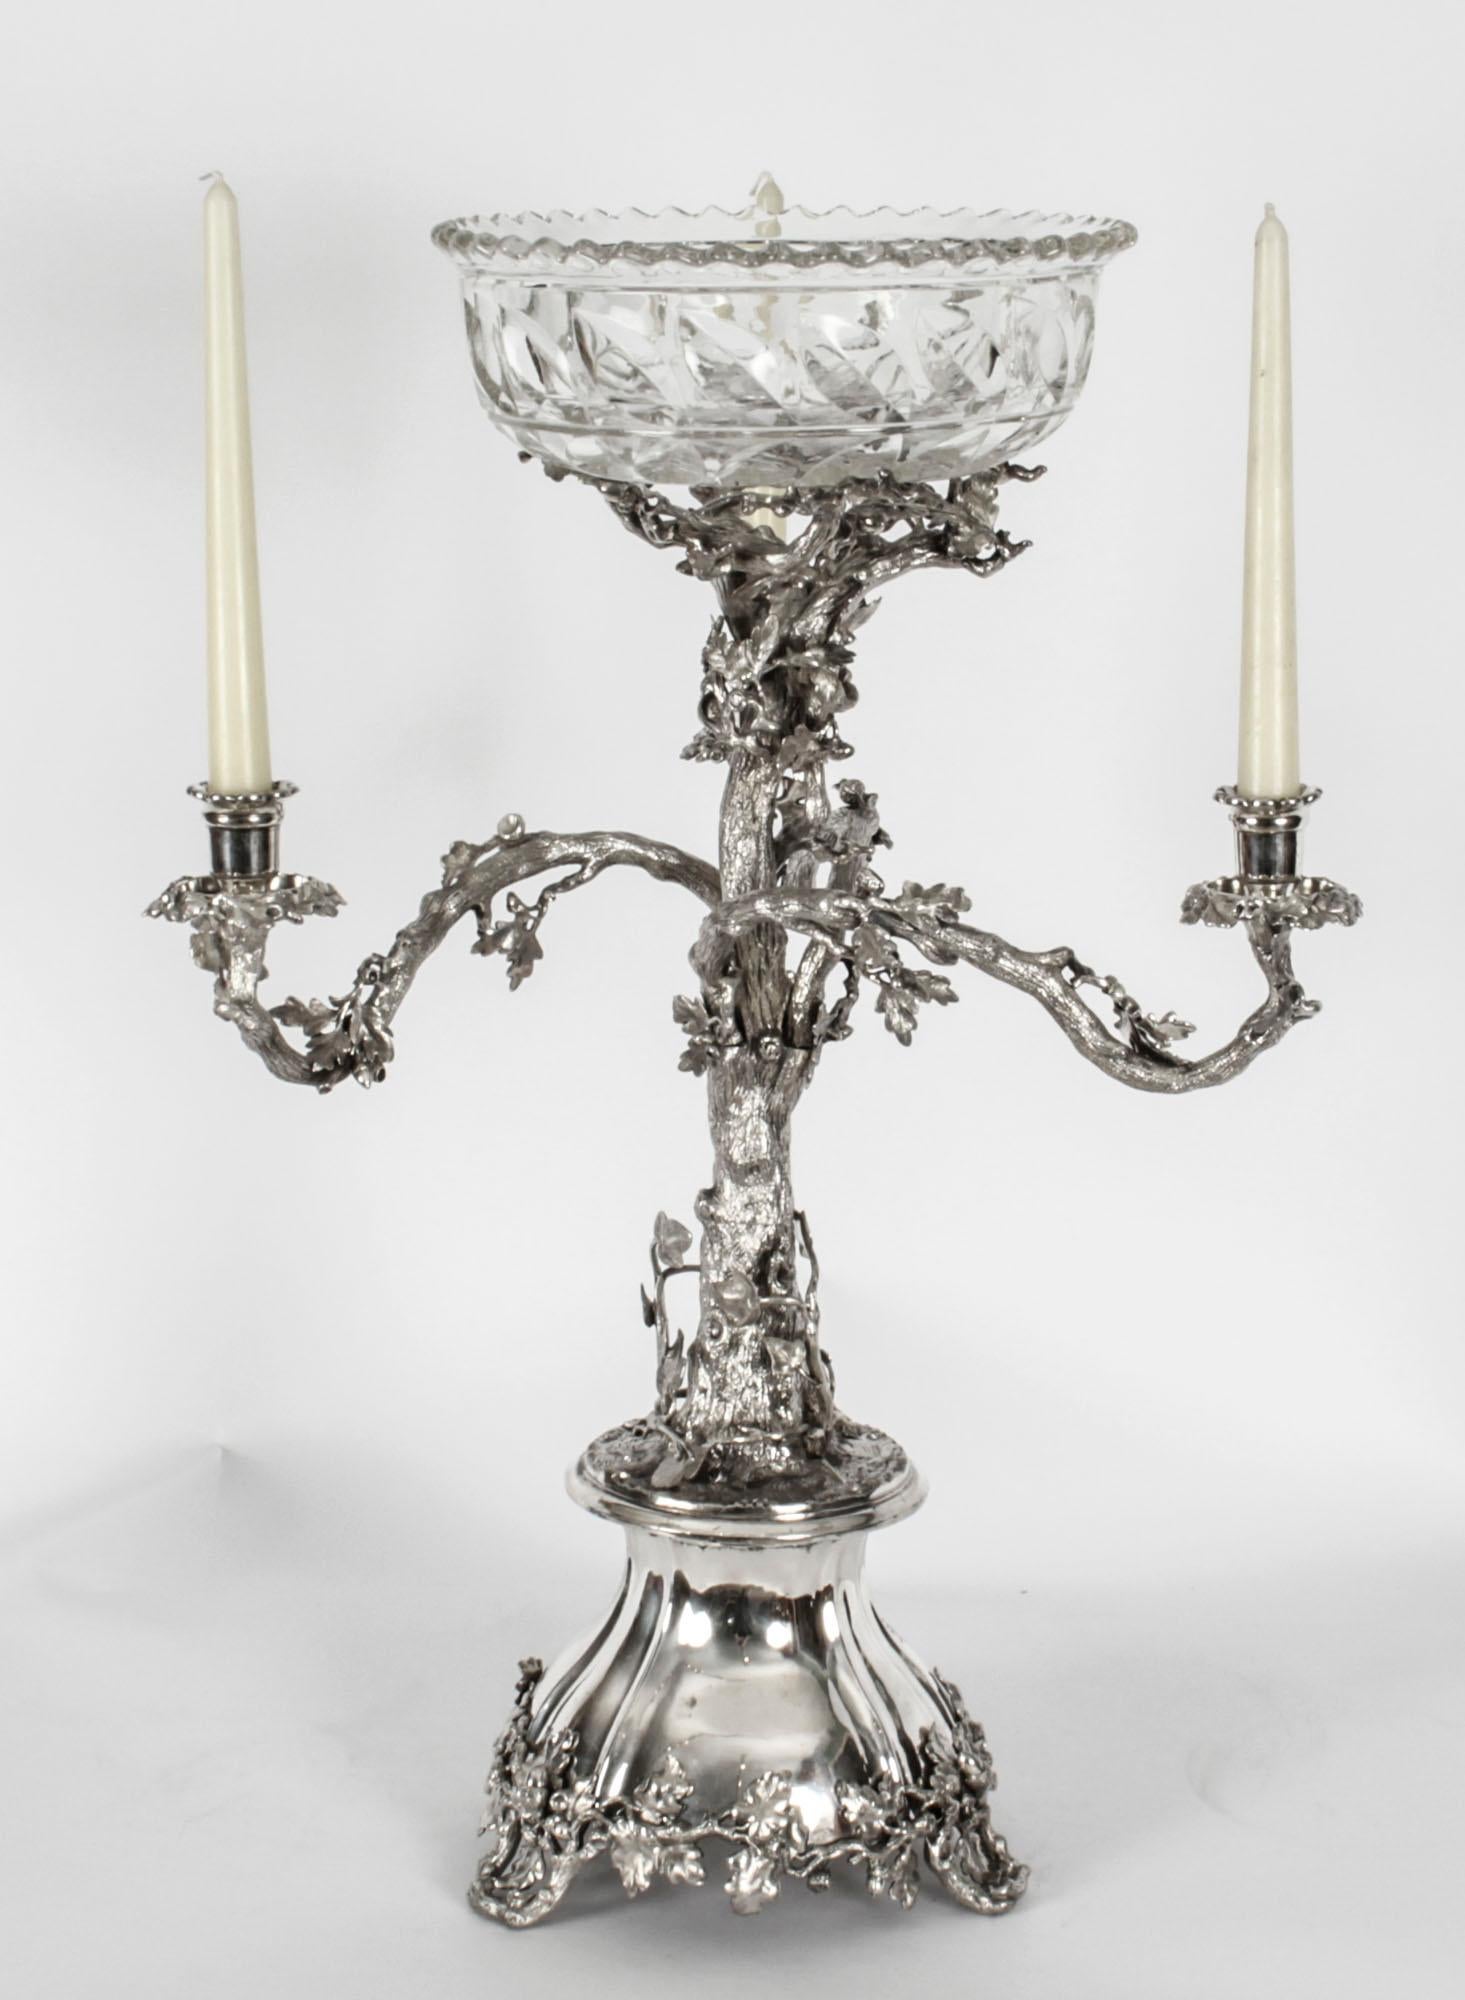 This is a wonderful and rare huge antique English Victorian silver plated bronze table centerpiece / candelabra by the renowned silversmith Elkington, Circa 1860 in date.
 
The superb centrepiece features a central pedestal in the form of an oak